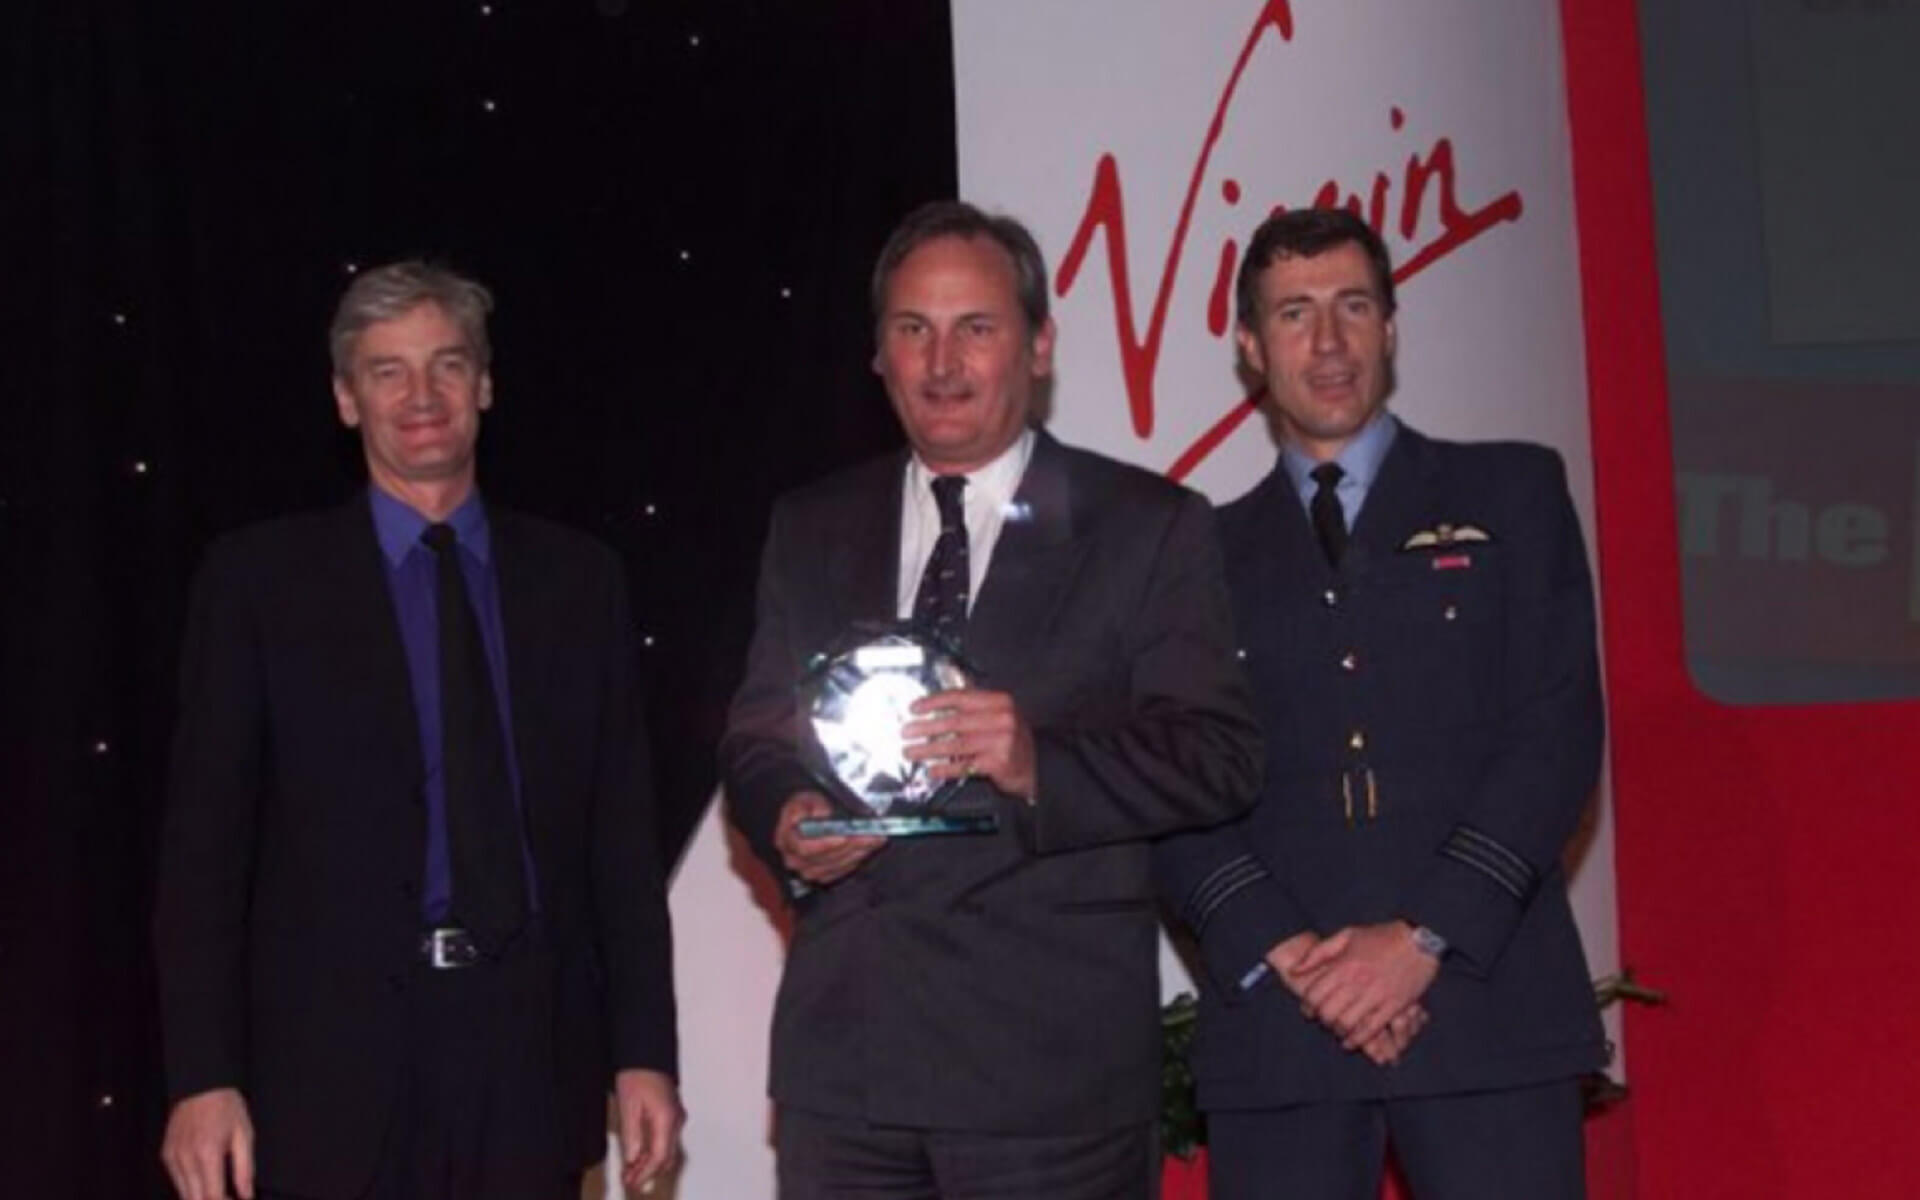 Pioneers of the Year - Richard Noble and Sqn. Ldr Andt Green